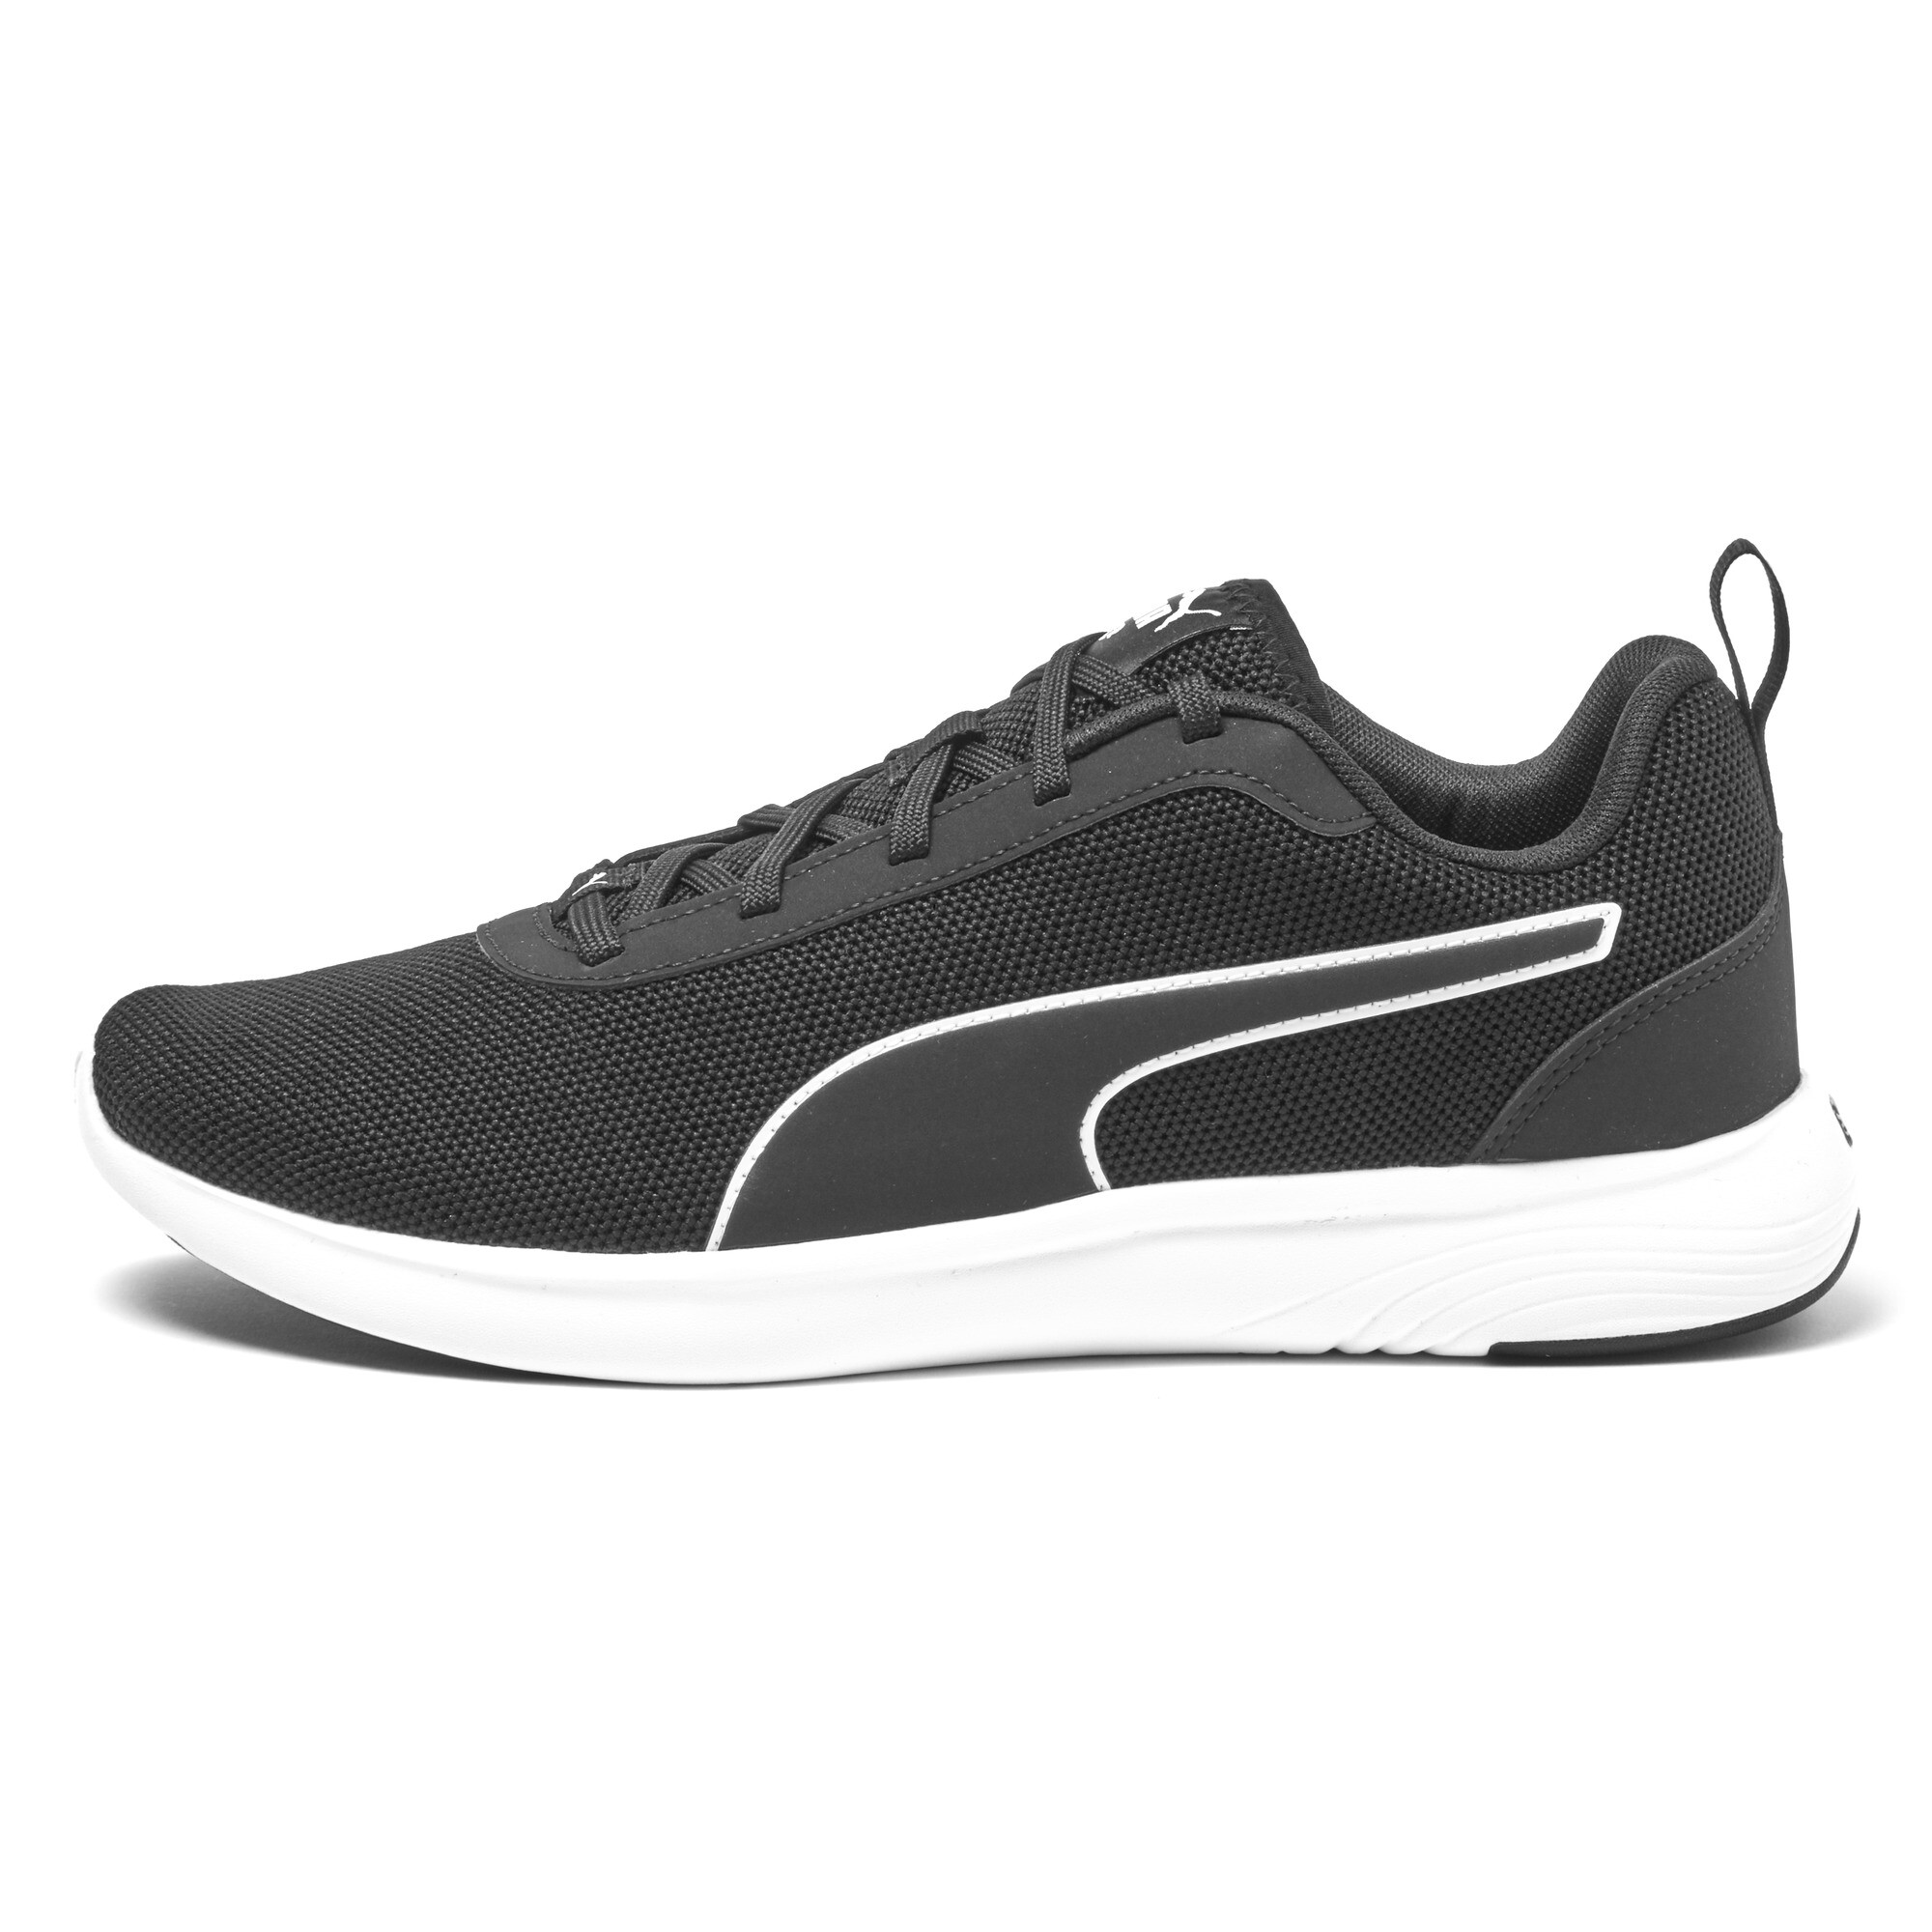 PUMA SOFTRIDE Vital Fresh Better Running Shoes Trainers Lace Up Low Top  Womens eBay